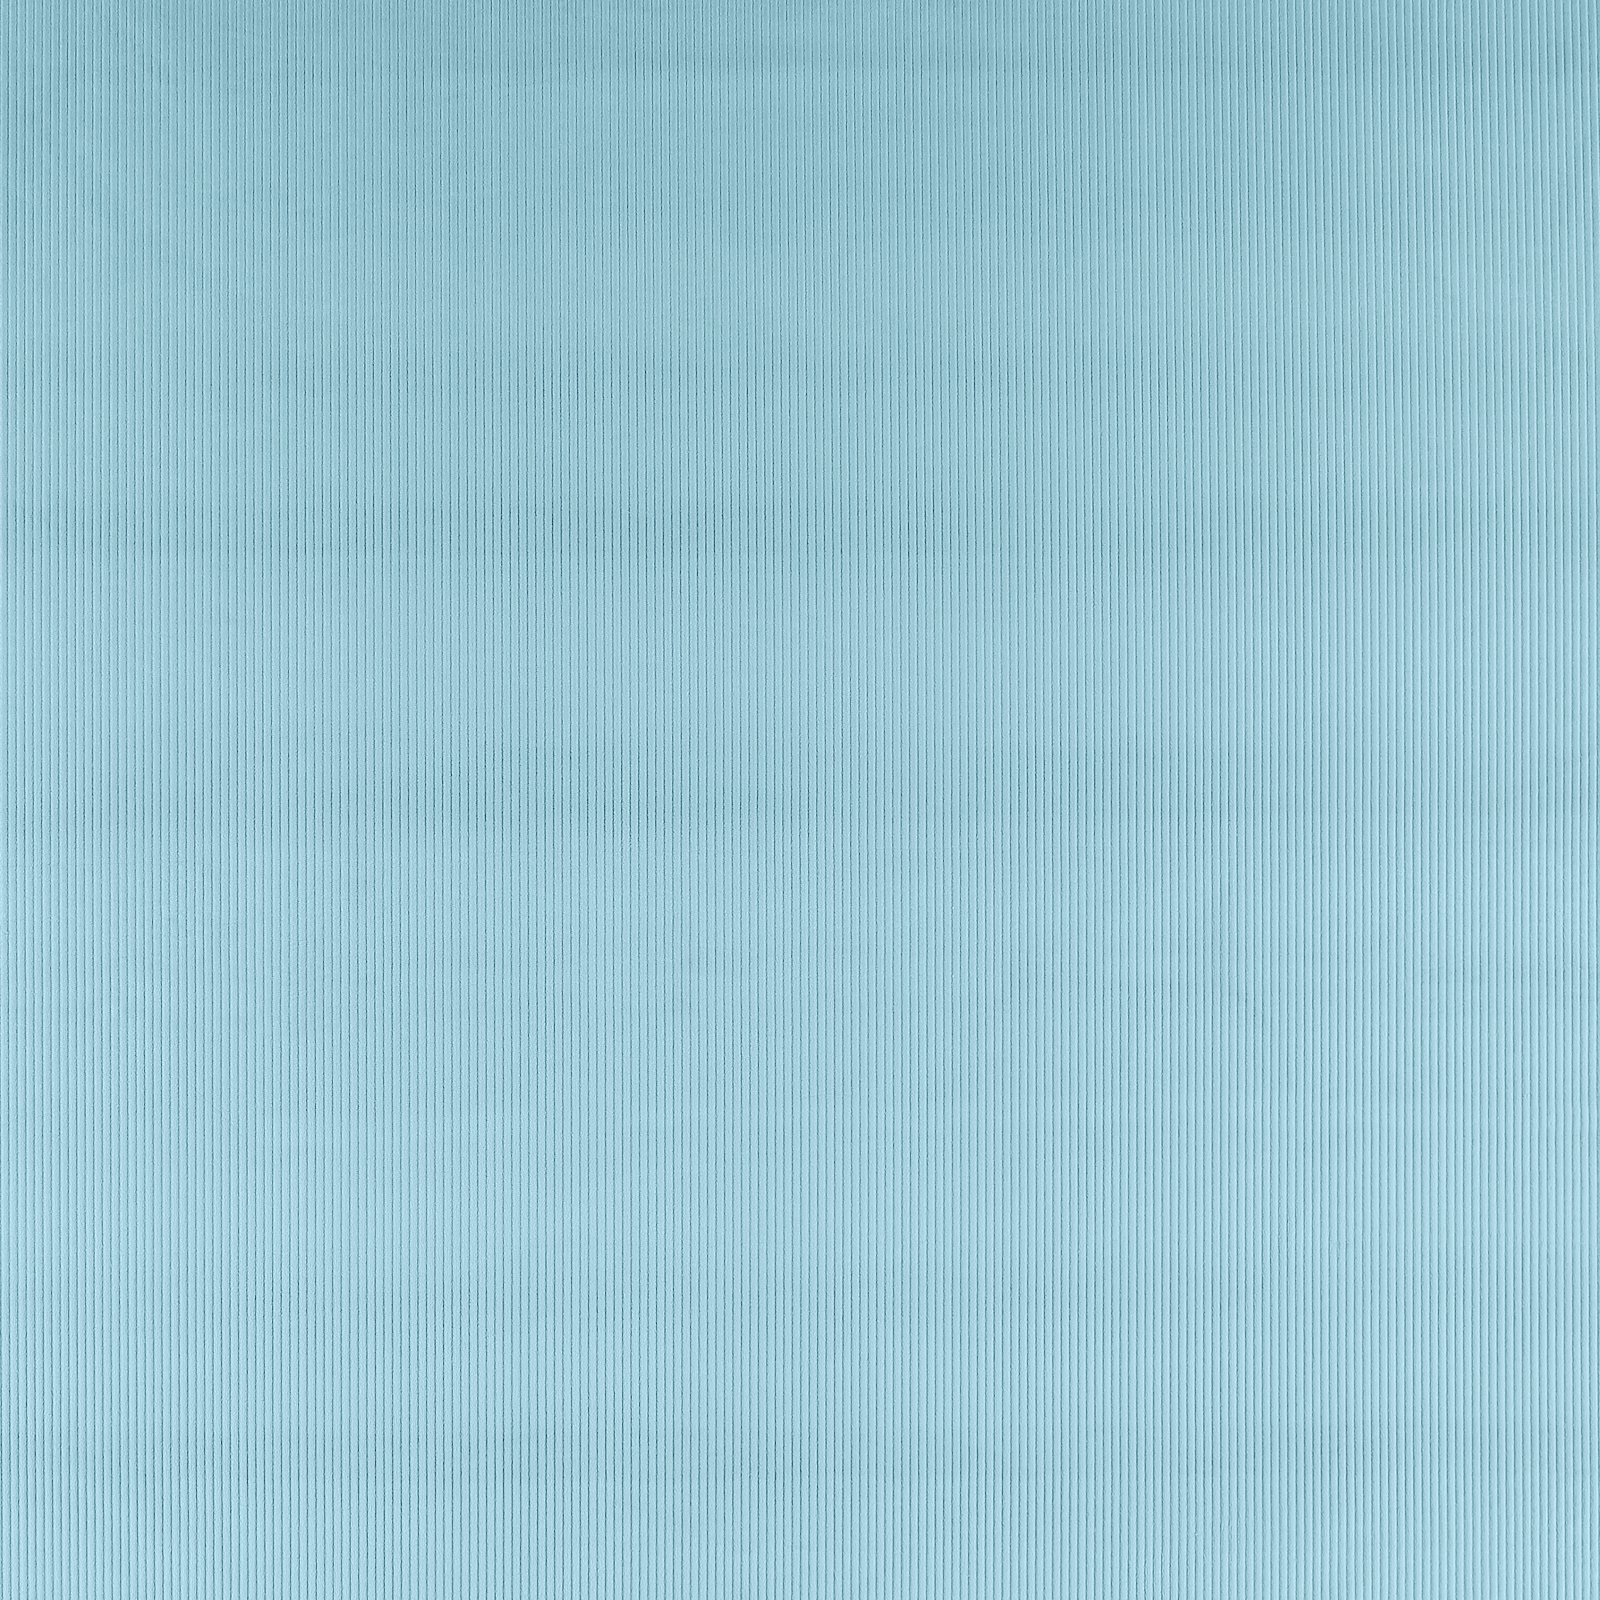 Upholstery mic corduroy 6 wales ice blue 826509_pack_solid